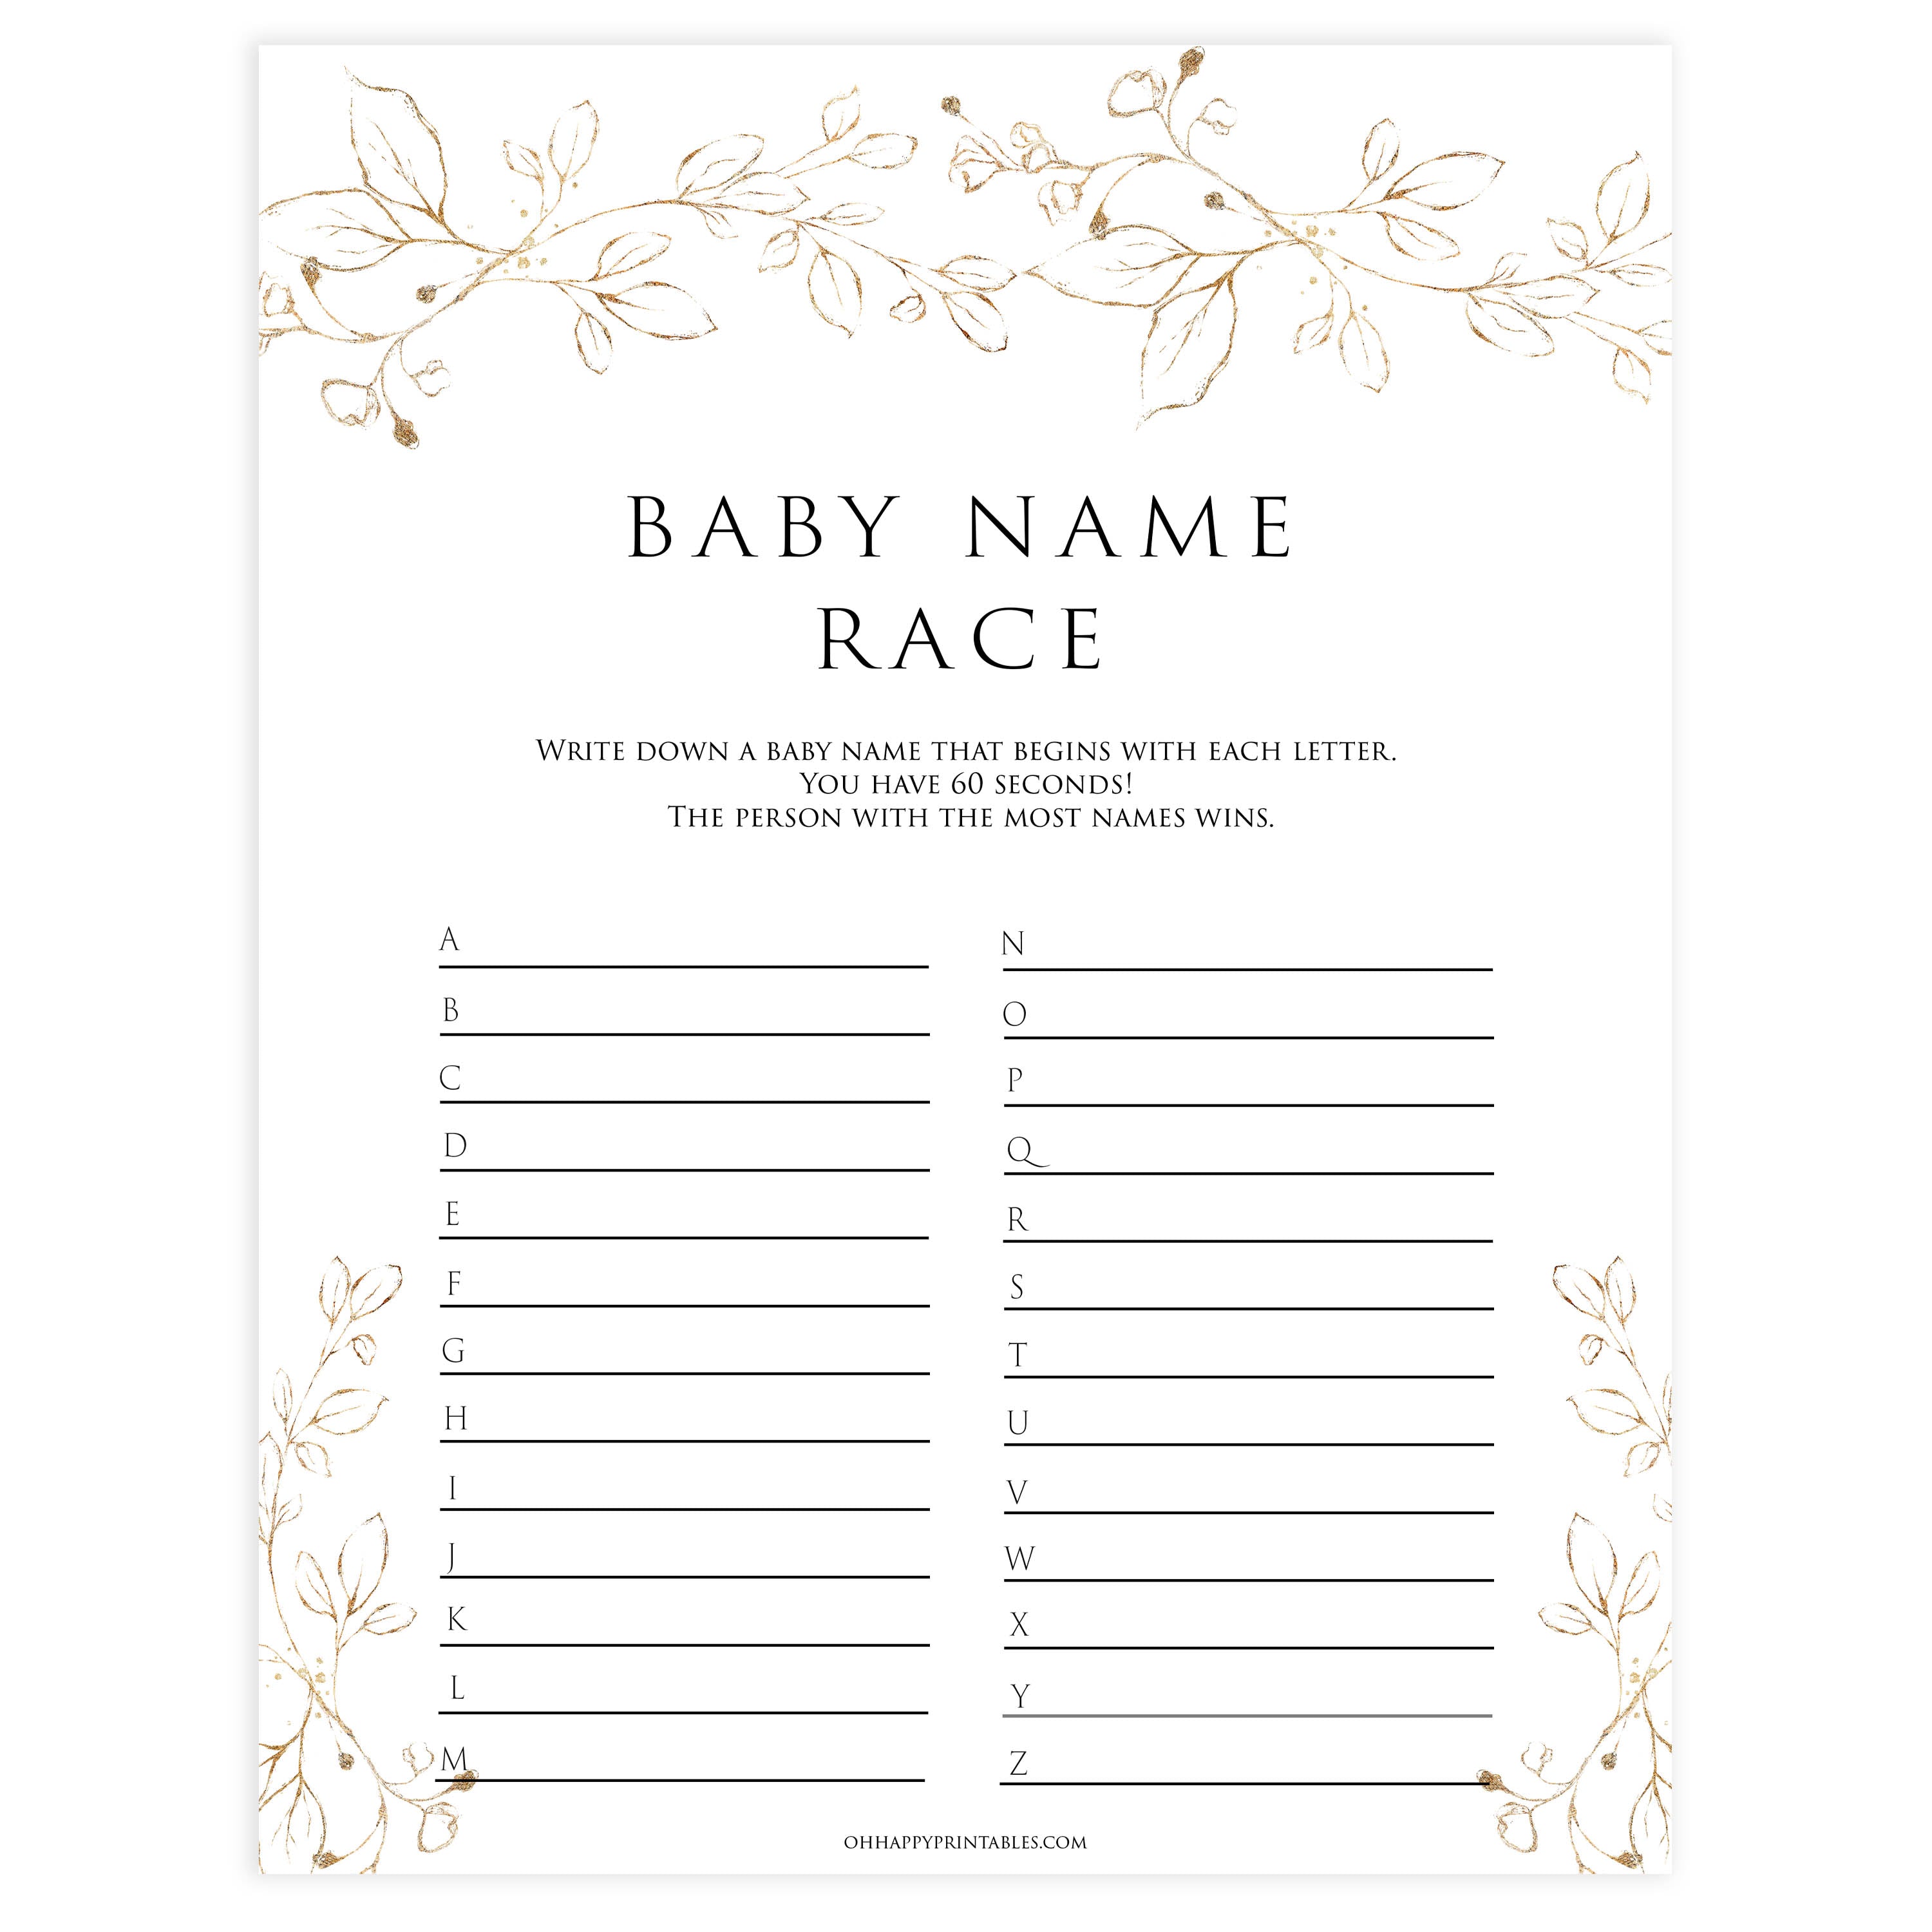 baby name race game, Printable baby shower games, gold leaf baby games, baby shower games, fun baby shower ideas, top baby shower ideas, gold leaf baby shower, baby shower games, fun gold leaf baby shower ideas